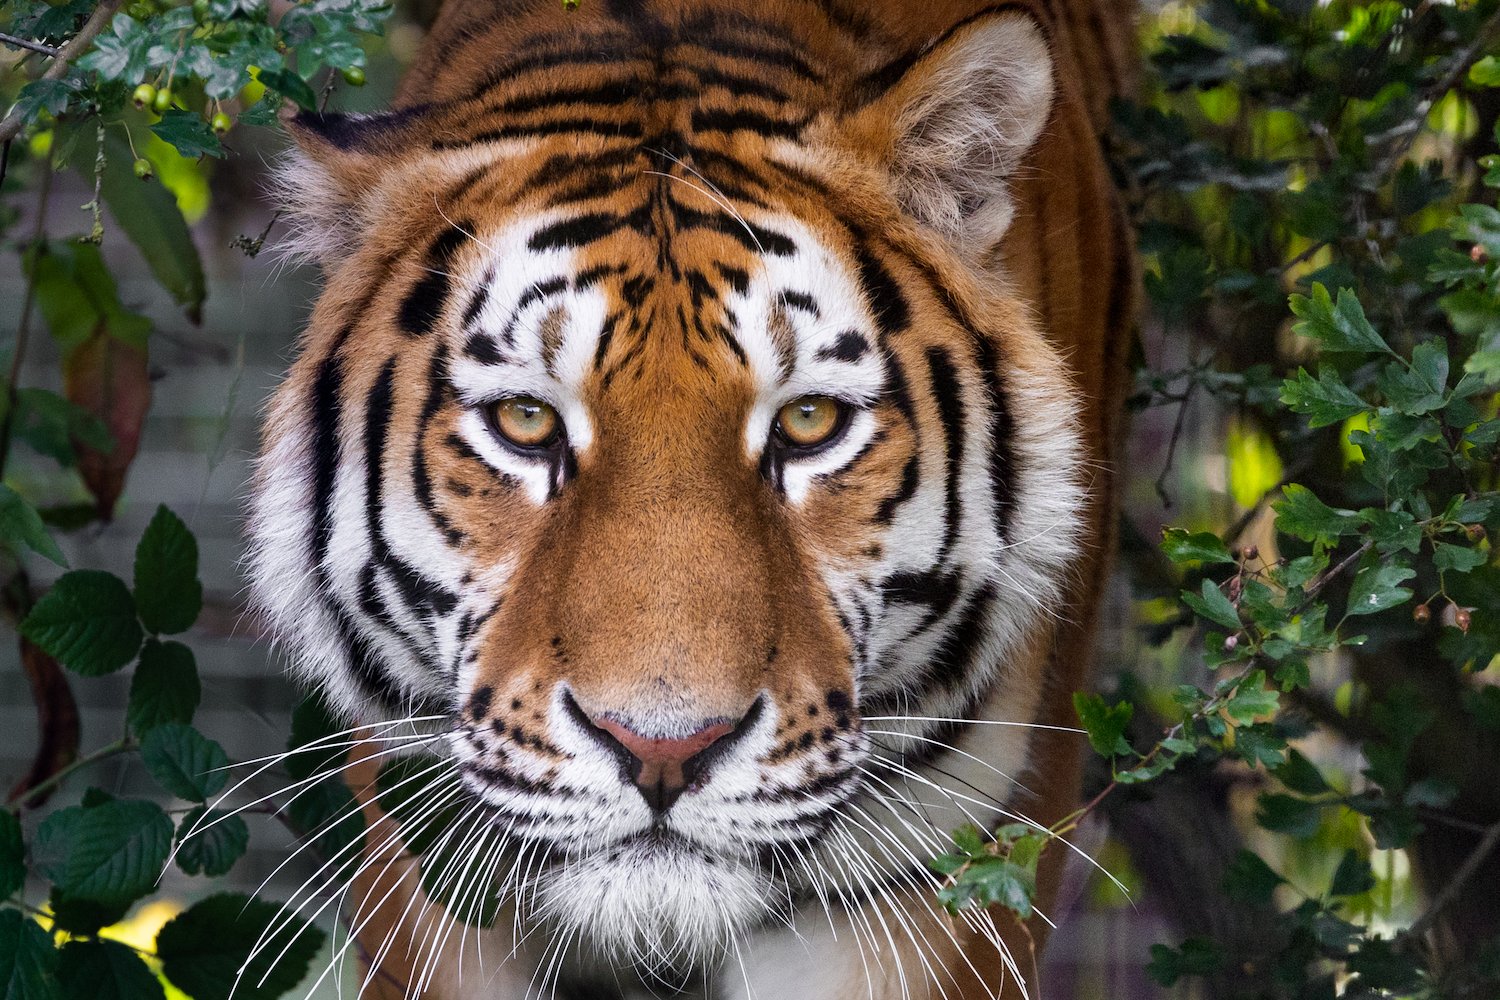 Win a fab day out at Big Cat Sanctuary worth £500!